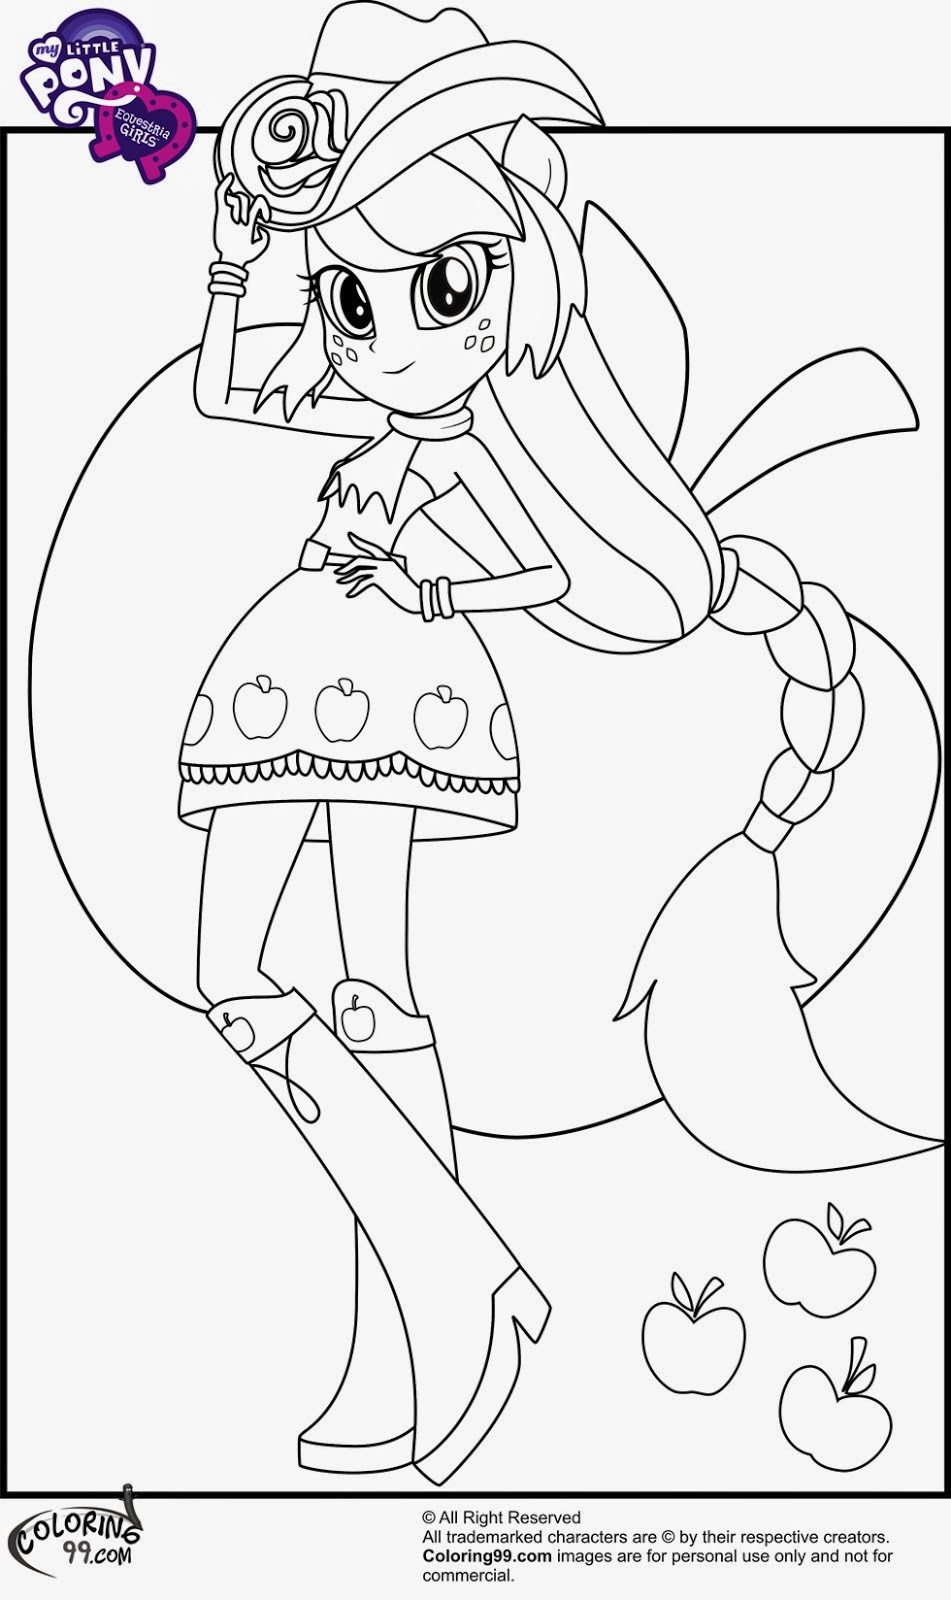 Equestria Girls Coloring Pages
 My Little Pony Equestria Girls Blog ¡¡Imágenes para